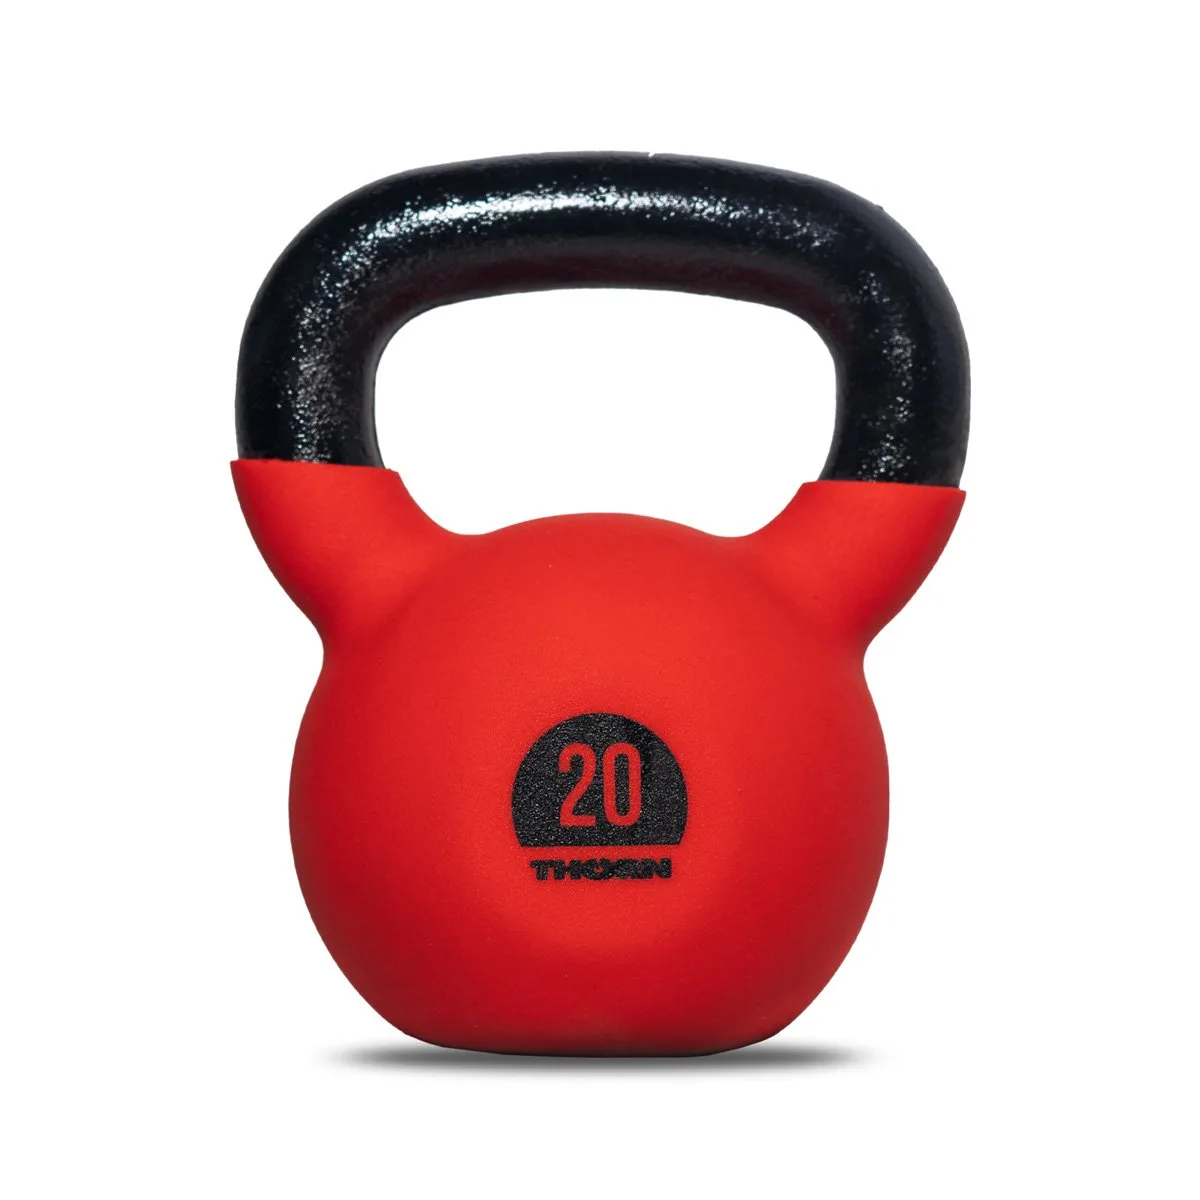 Cast-iron kettlebell with rubber protective coating 20 kg – Thorn Fit, Crossfit equipment